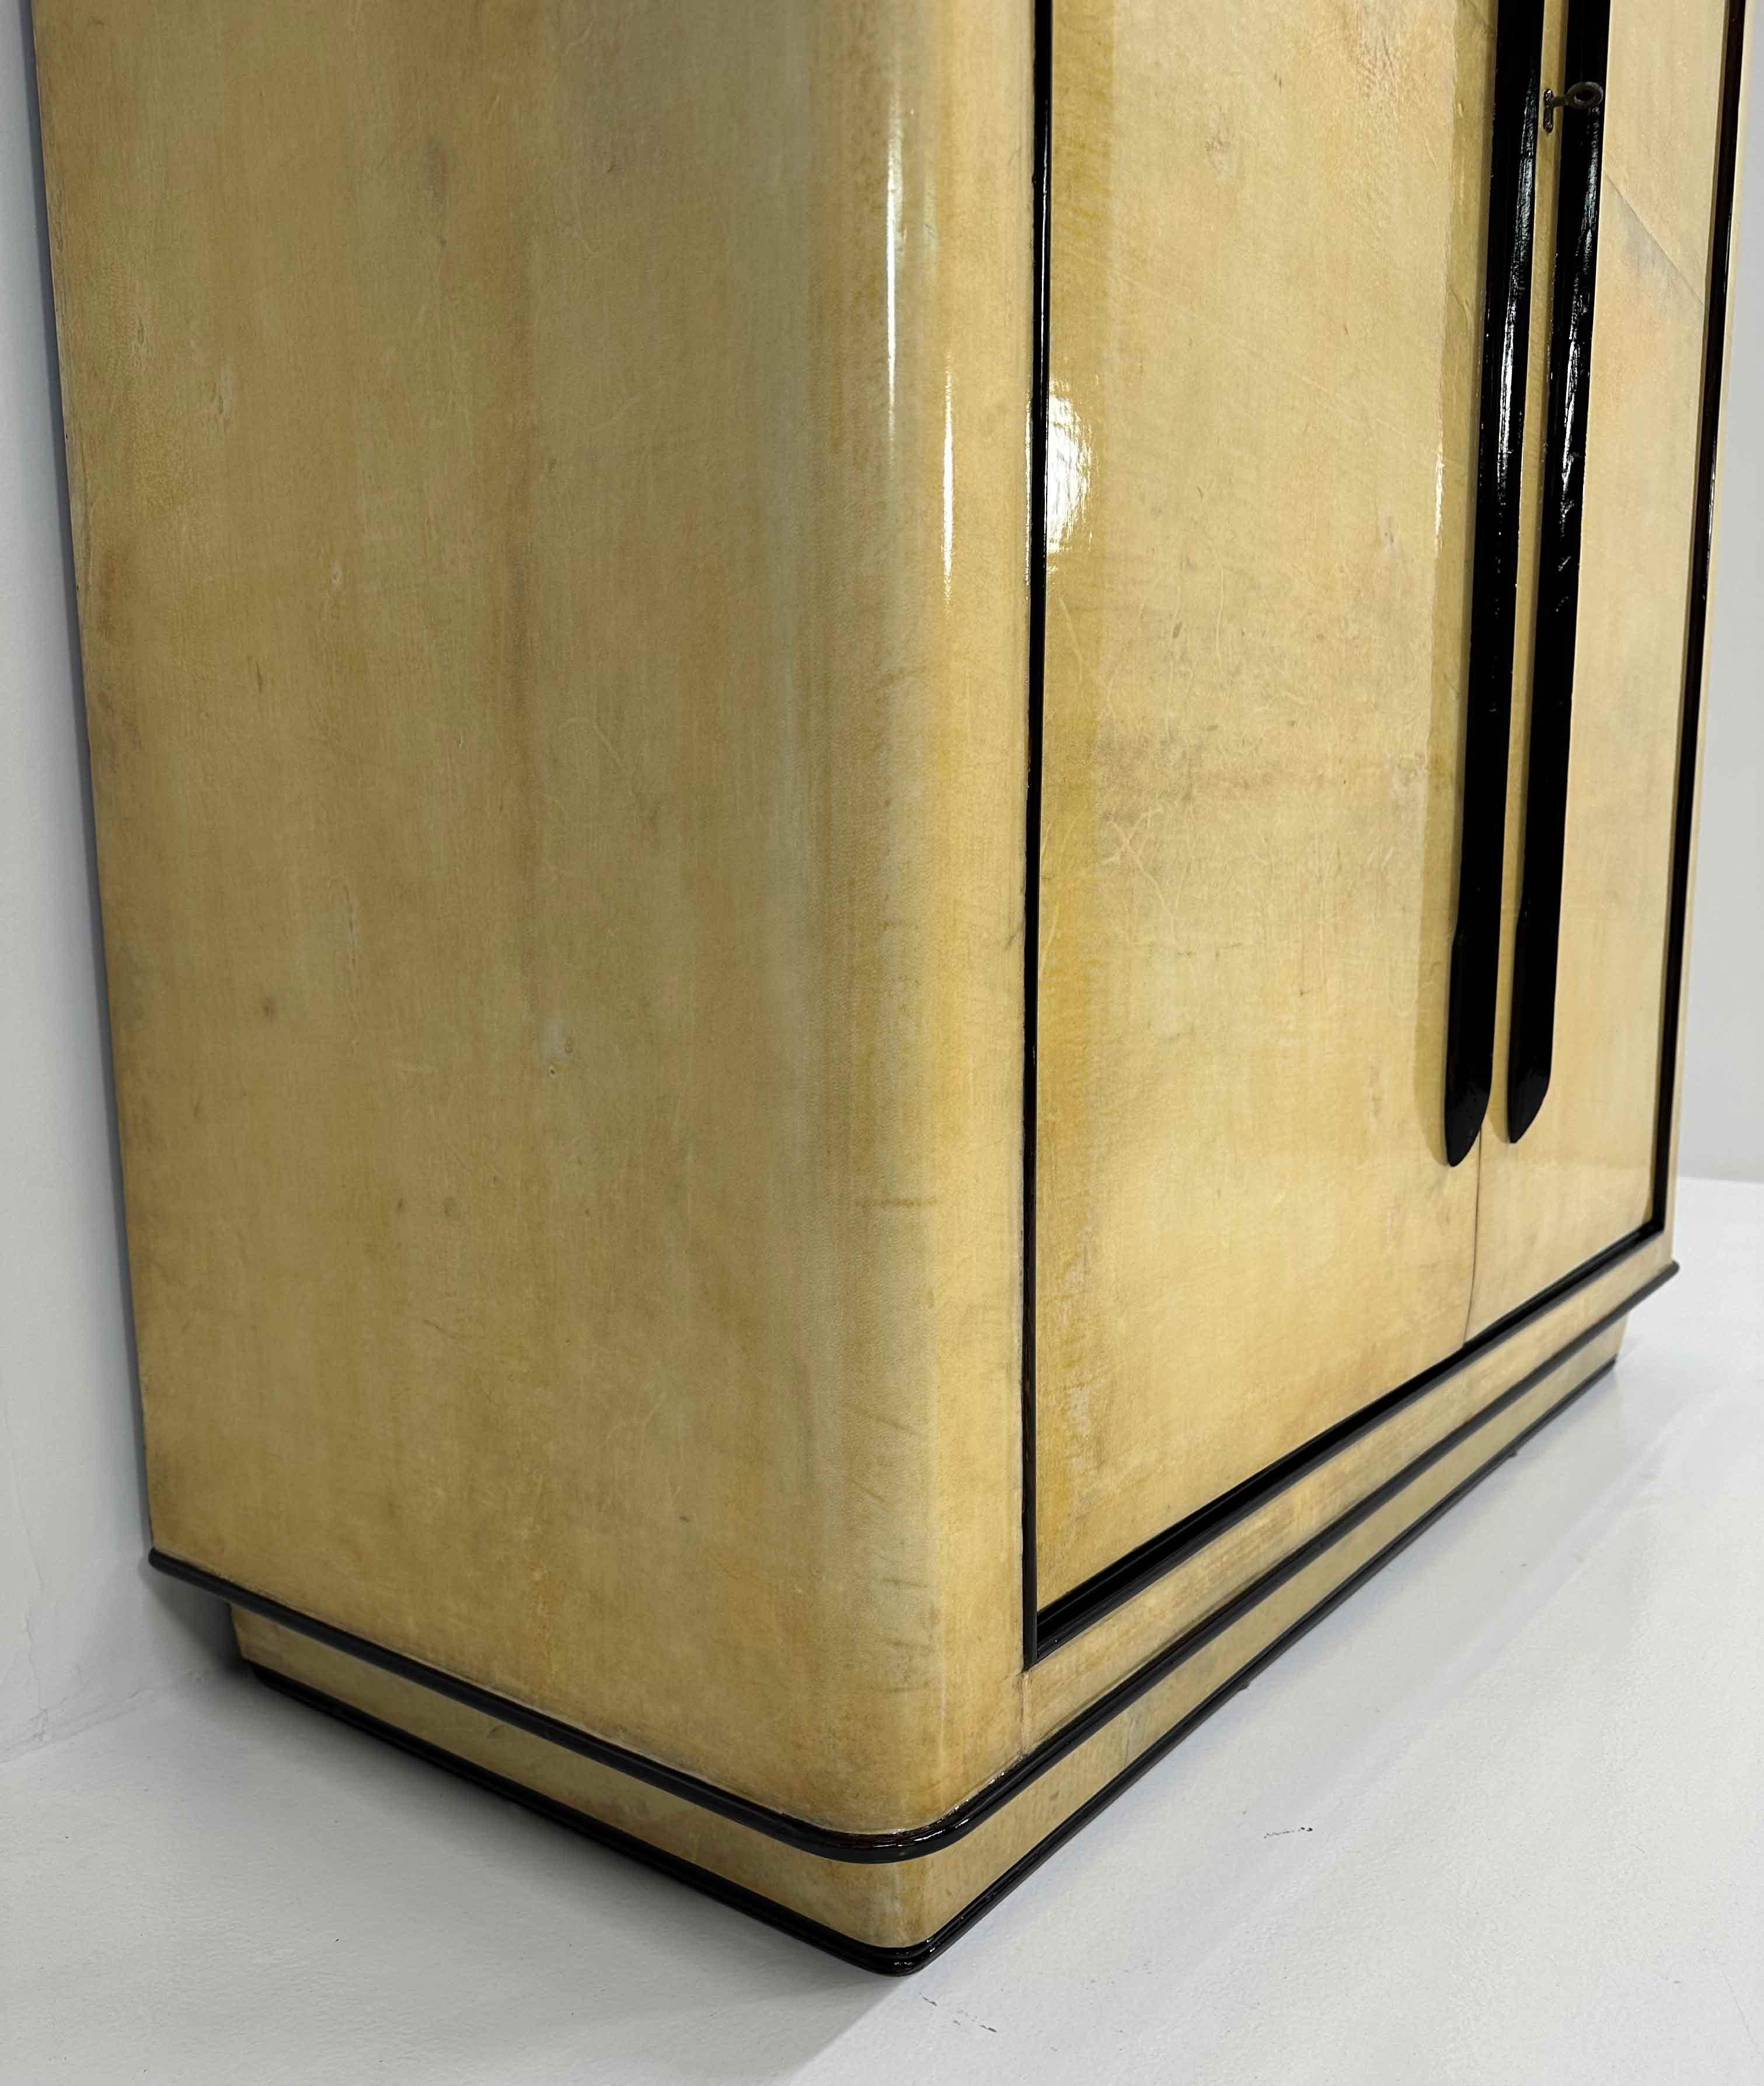 Italian Art Deco Parchment and Walnut Dye Armoire, att. to Ulrich, 1930s For Sale 1